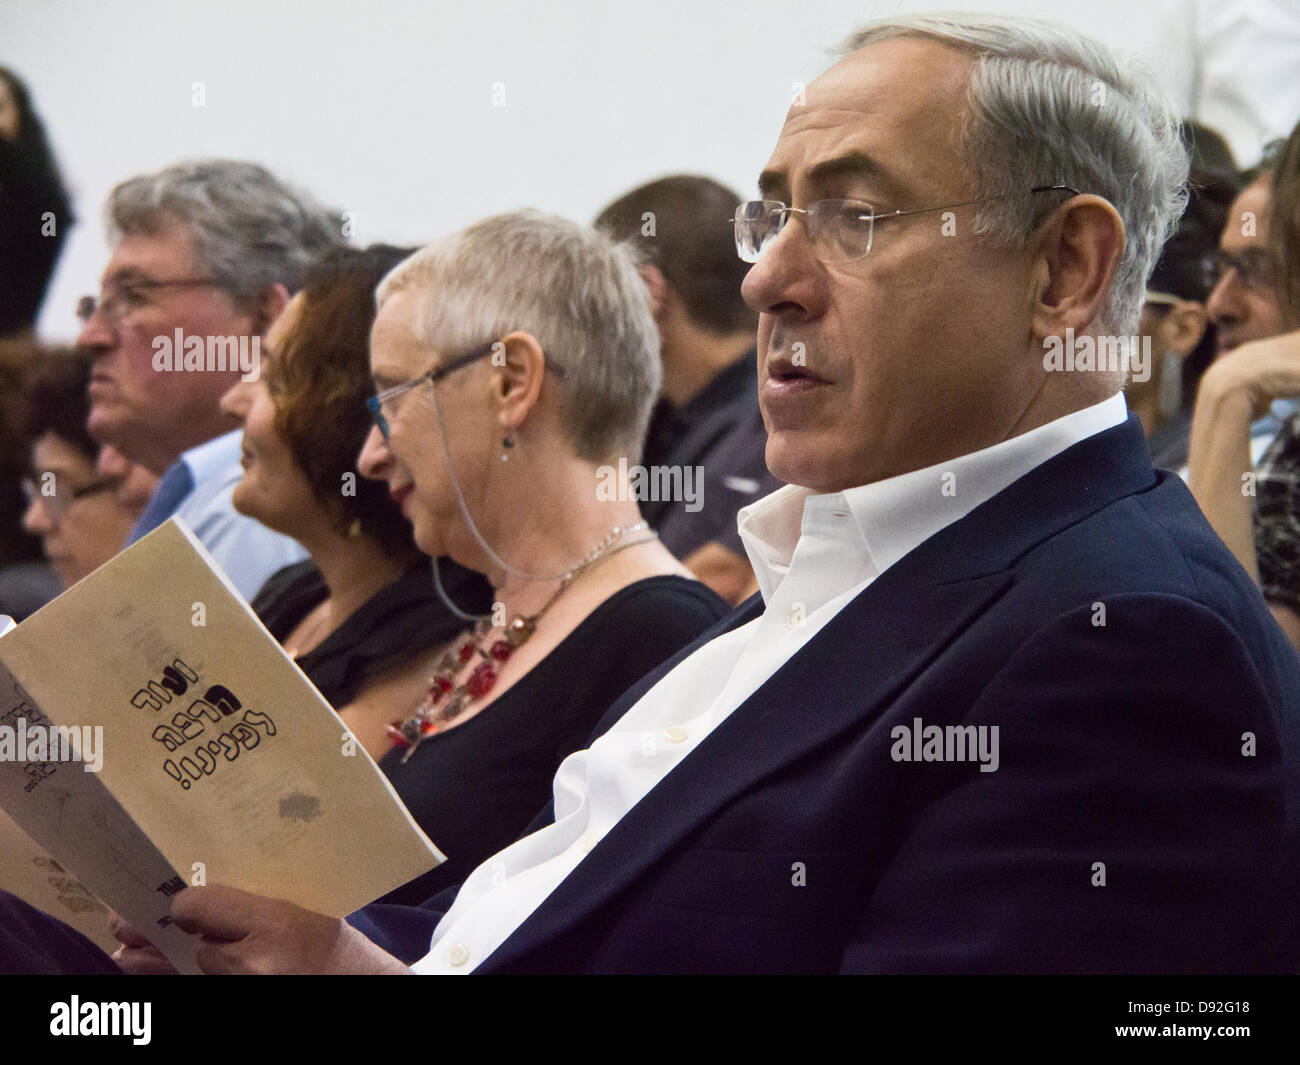 Prime Minister BENJAMIN NETANYAHU browses through the evening's program as he attends son's high school graduation ceremony. Jerusalem, Israel. 9-June-2013.  Prime Minister Benjamin Netanyahu and wife Sarah Netanyahu attends son's high school graduation ceremony. Stock Photo